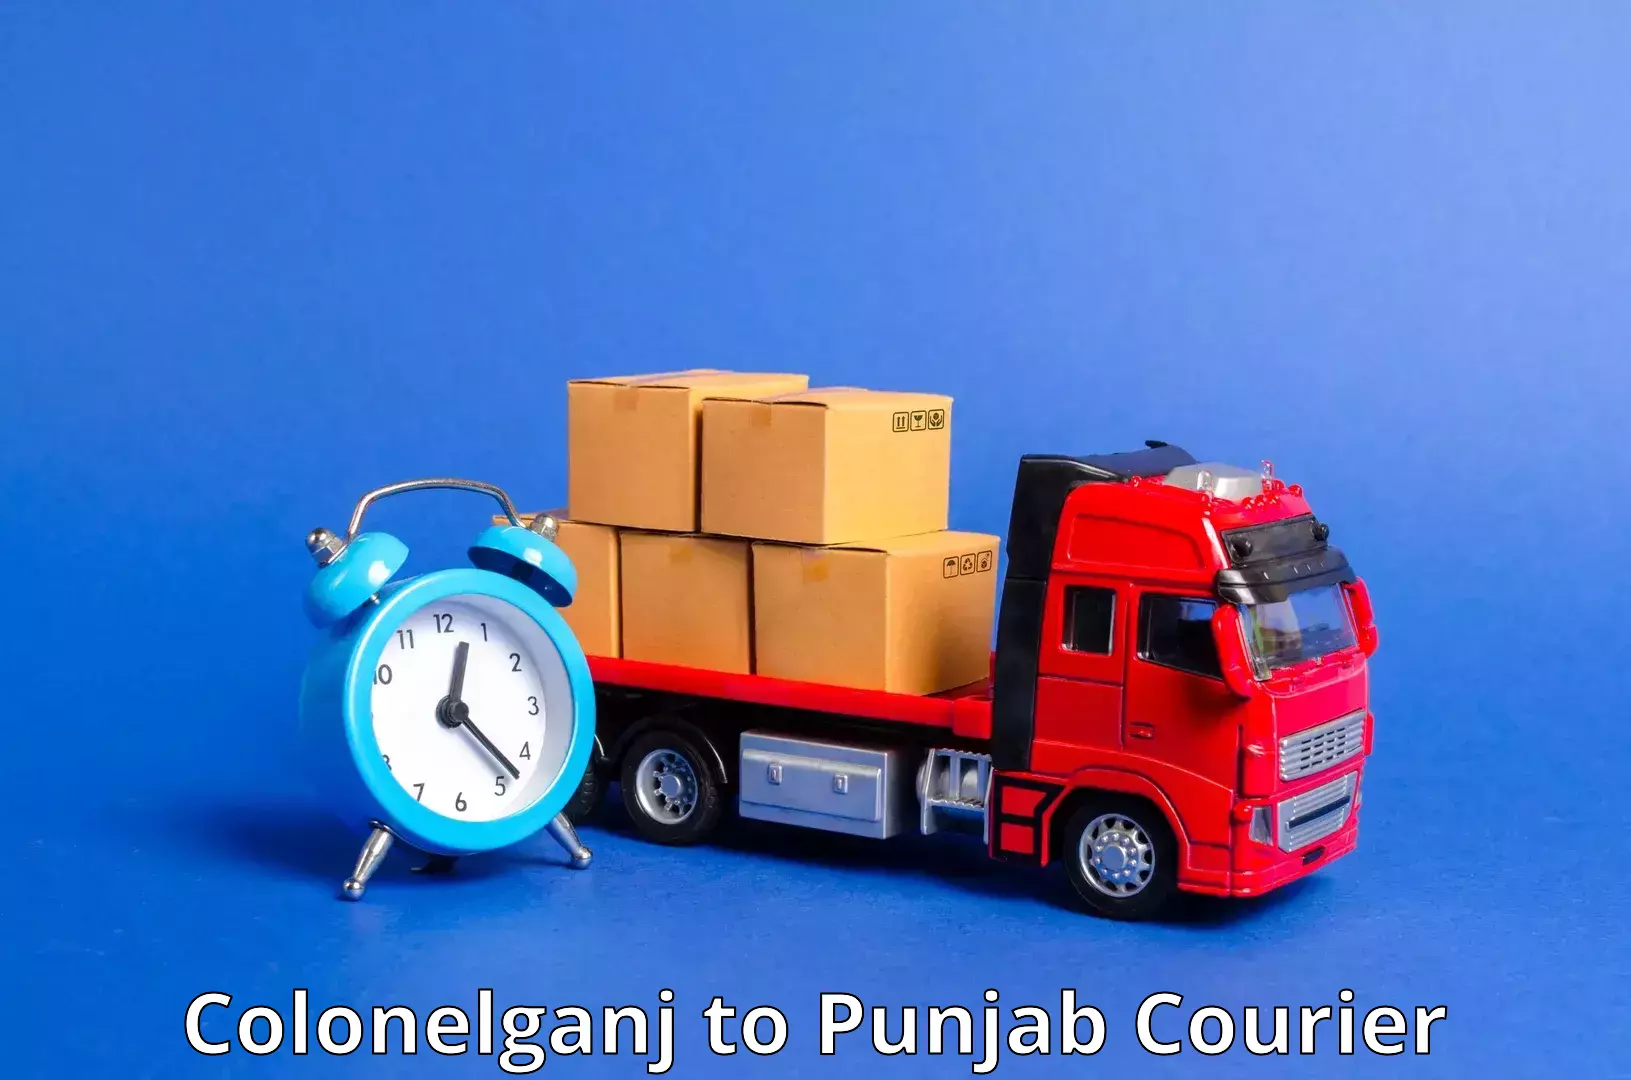 High-speed delivery in Colonelganj to Mohali